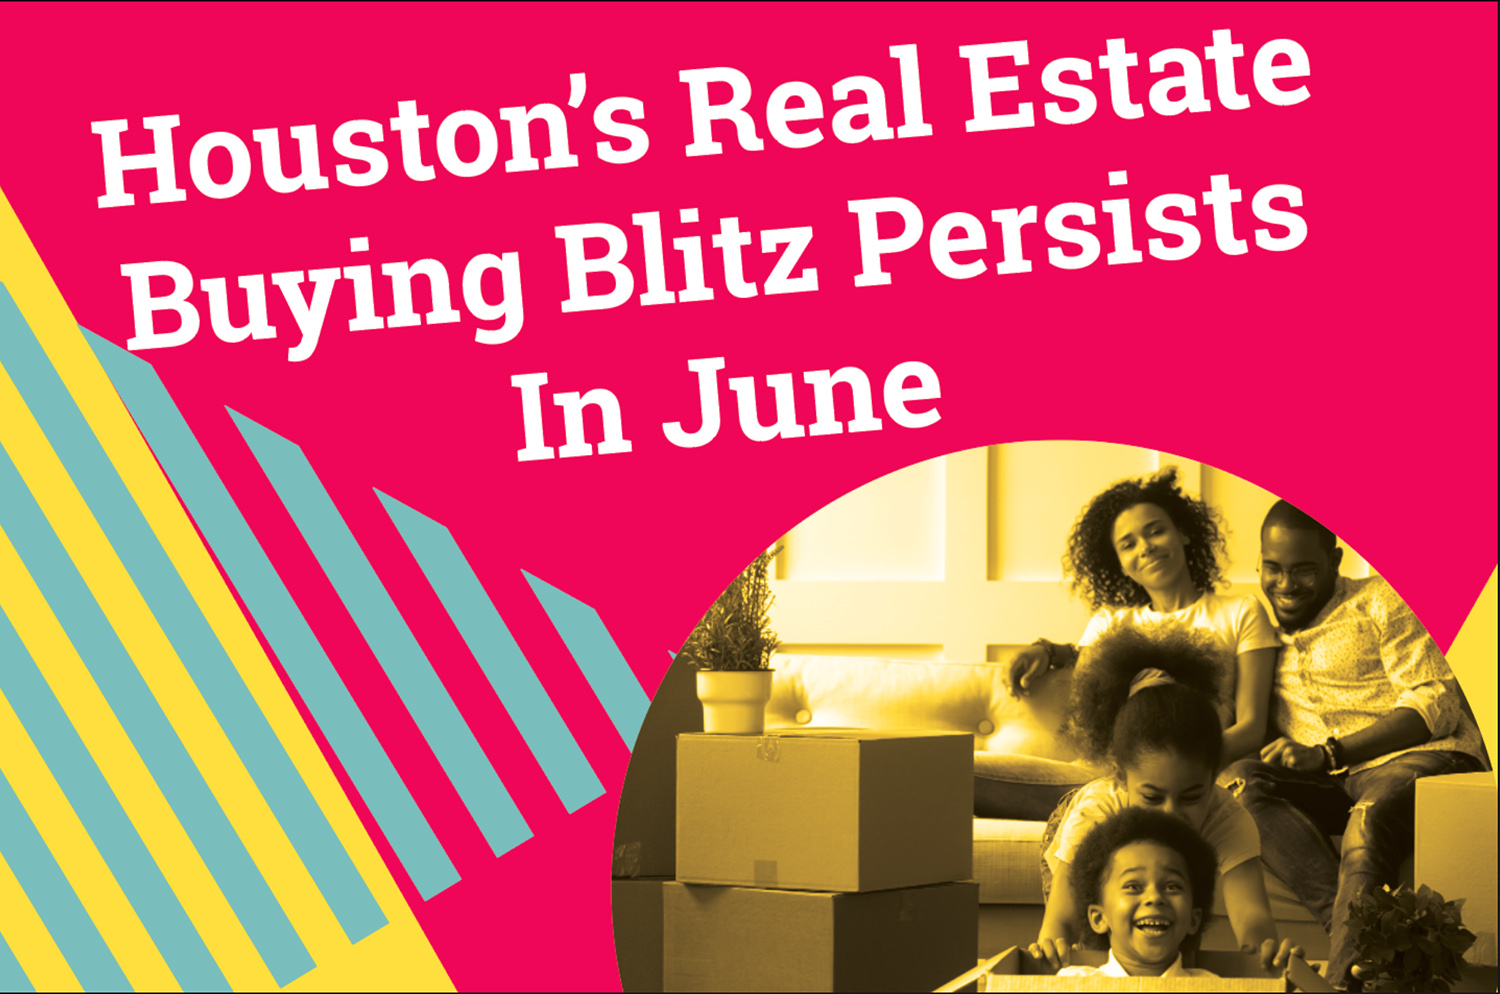 Houston’s Real Estate Buying Blitz Persists In June